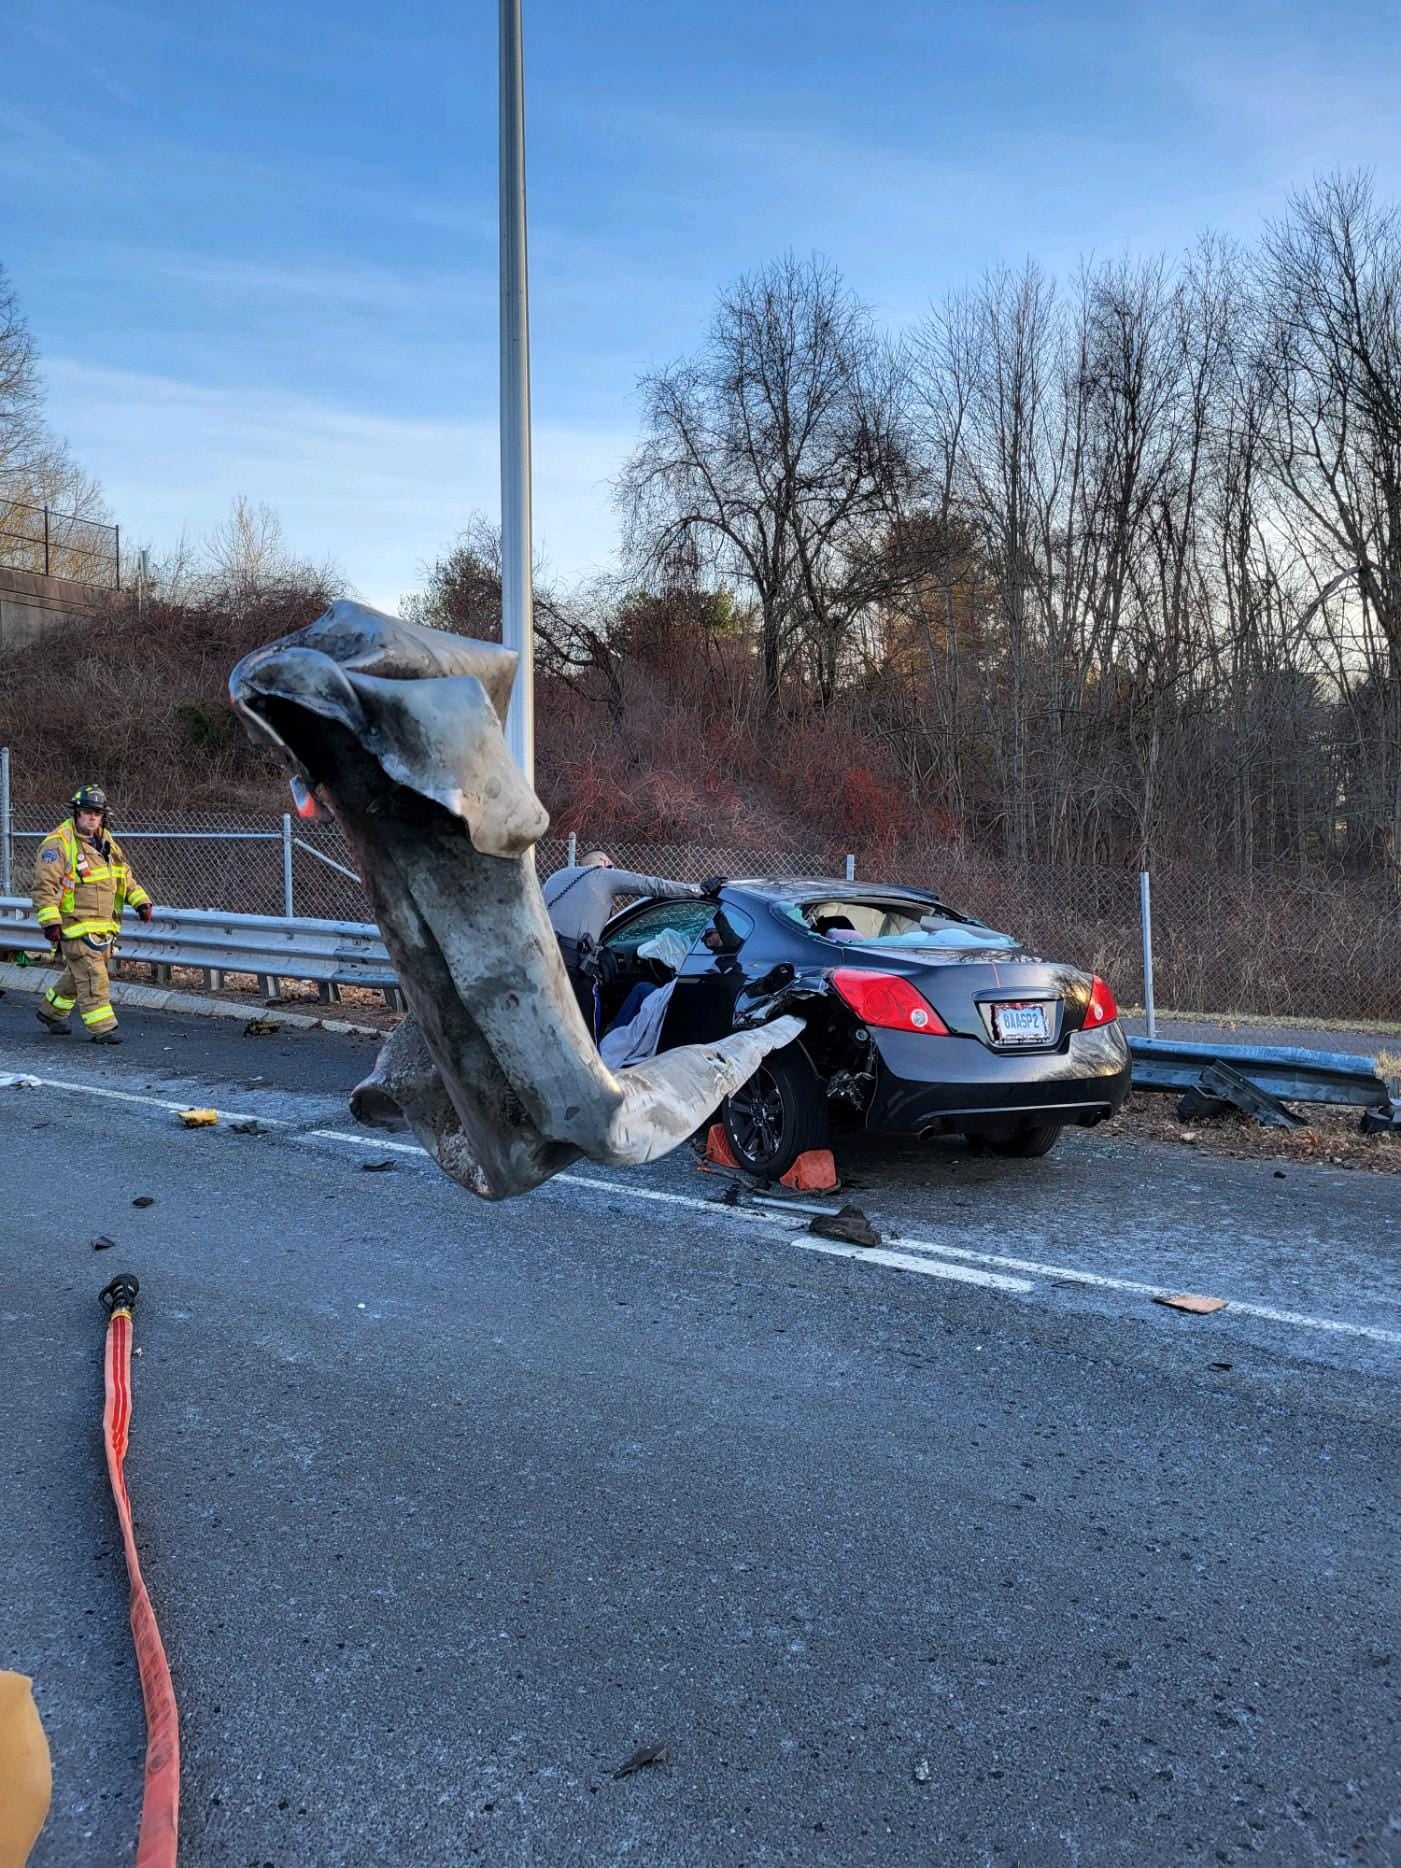 Authorities in Manchester, Connecticut, said the driver of a single-car crash walked away with minor injuries